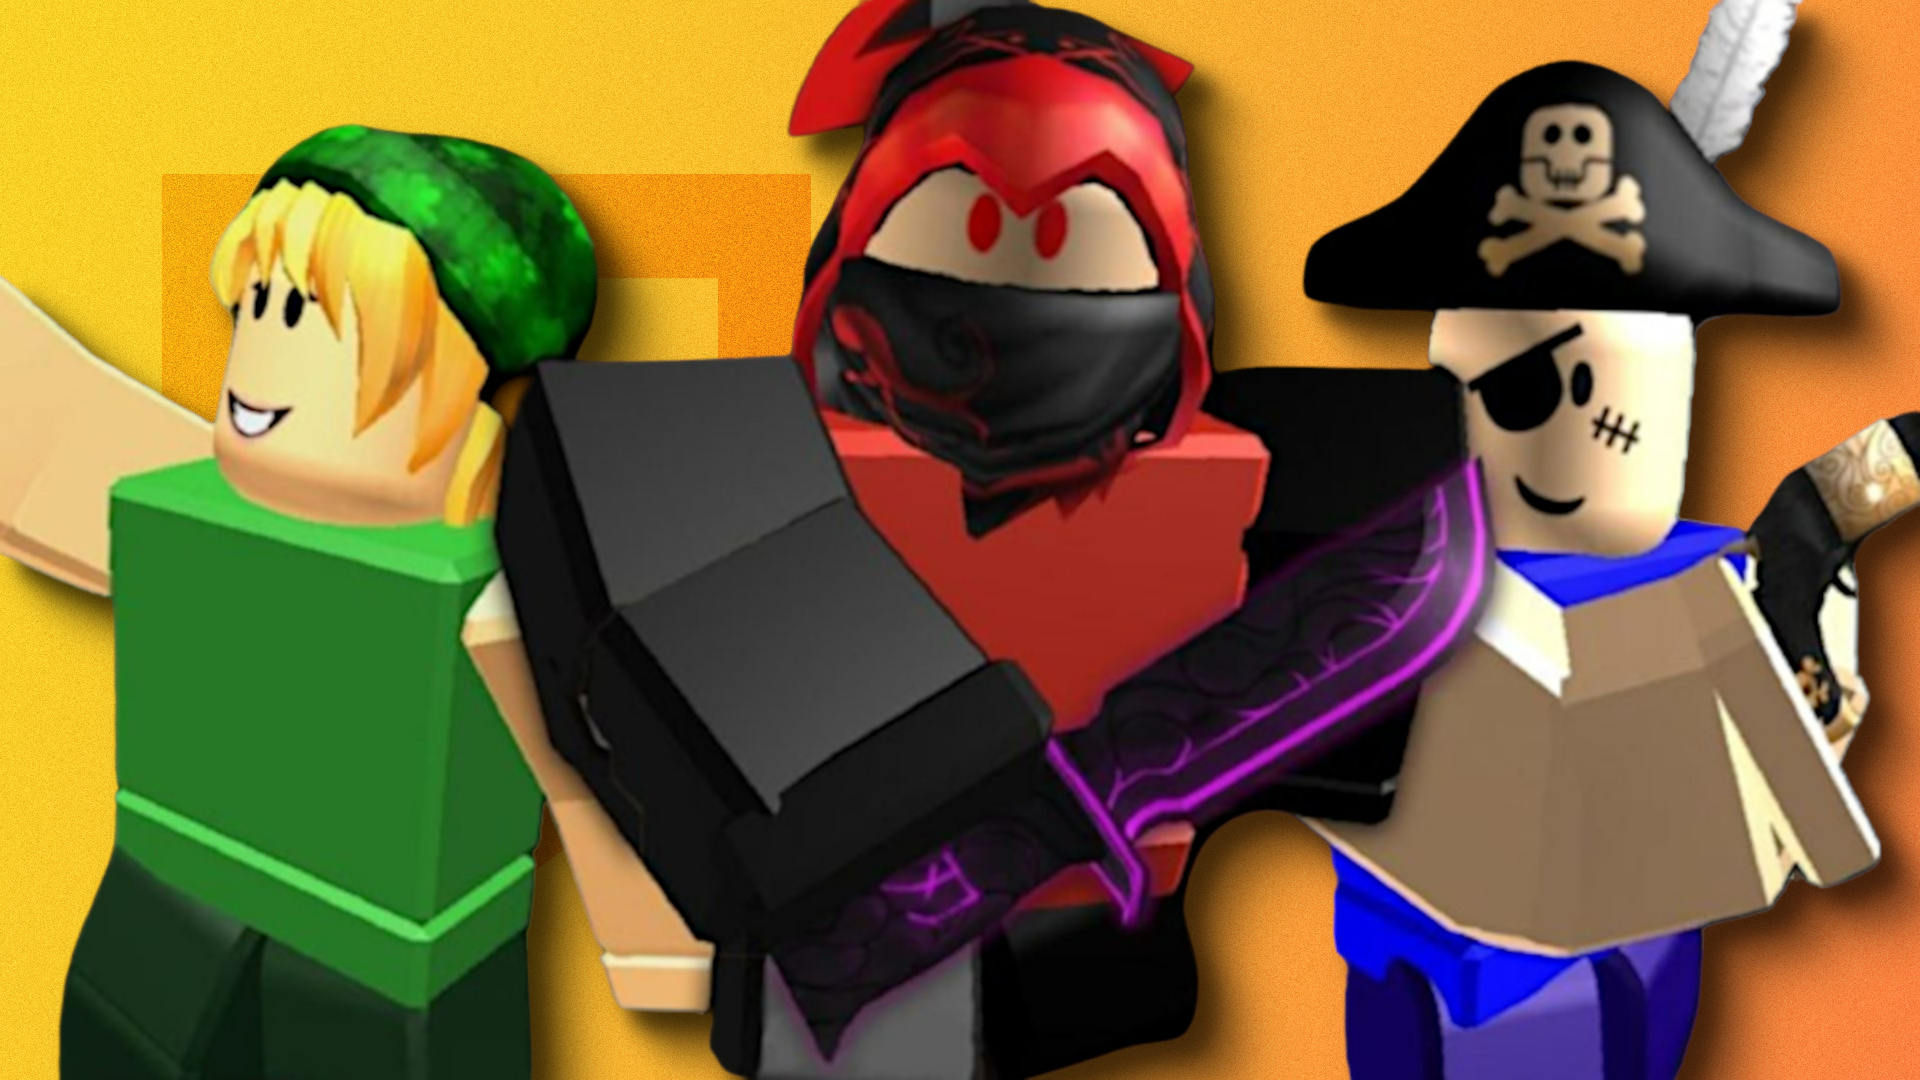 3 NEW FREE ROBLOX ITEMS 😱😱 2023 